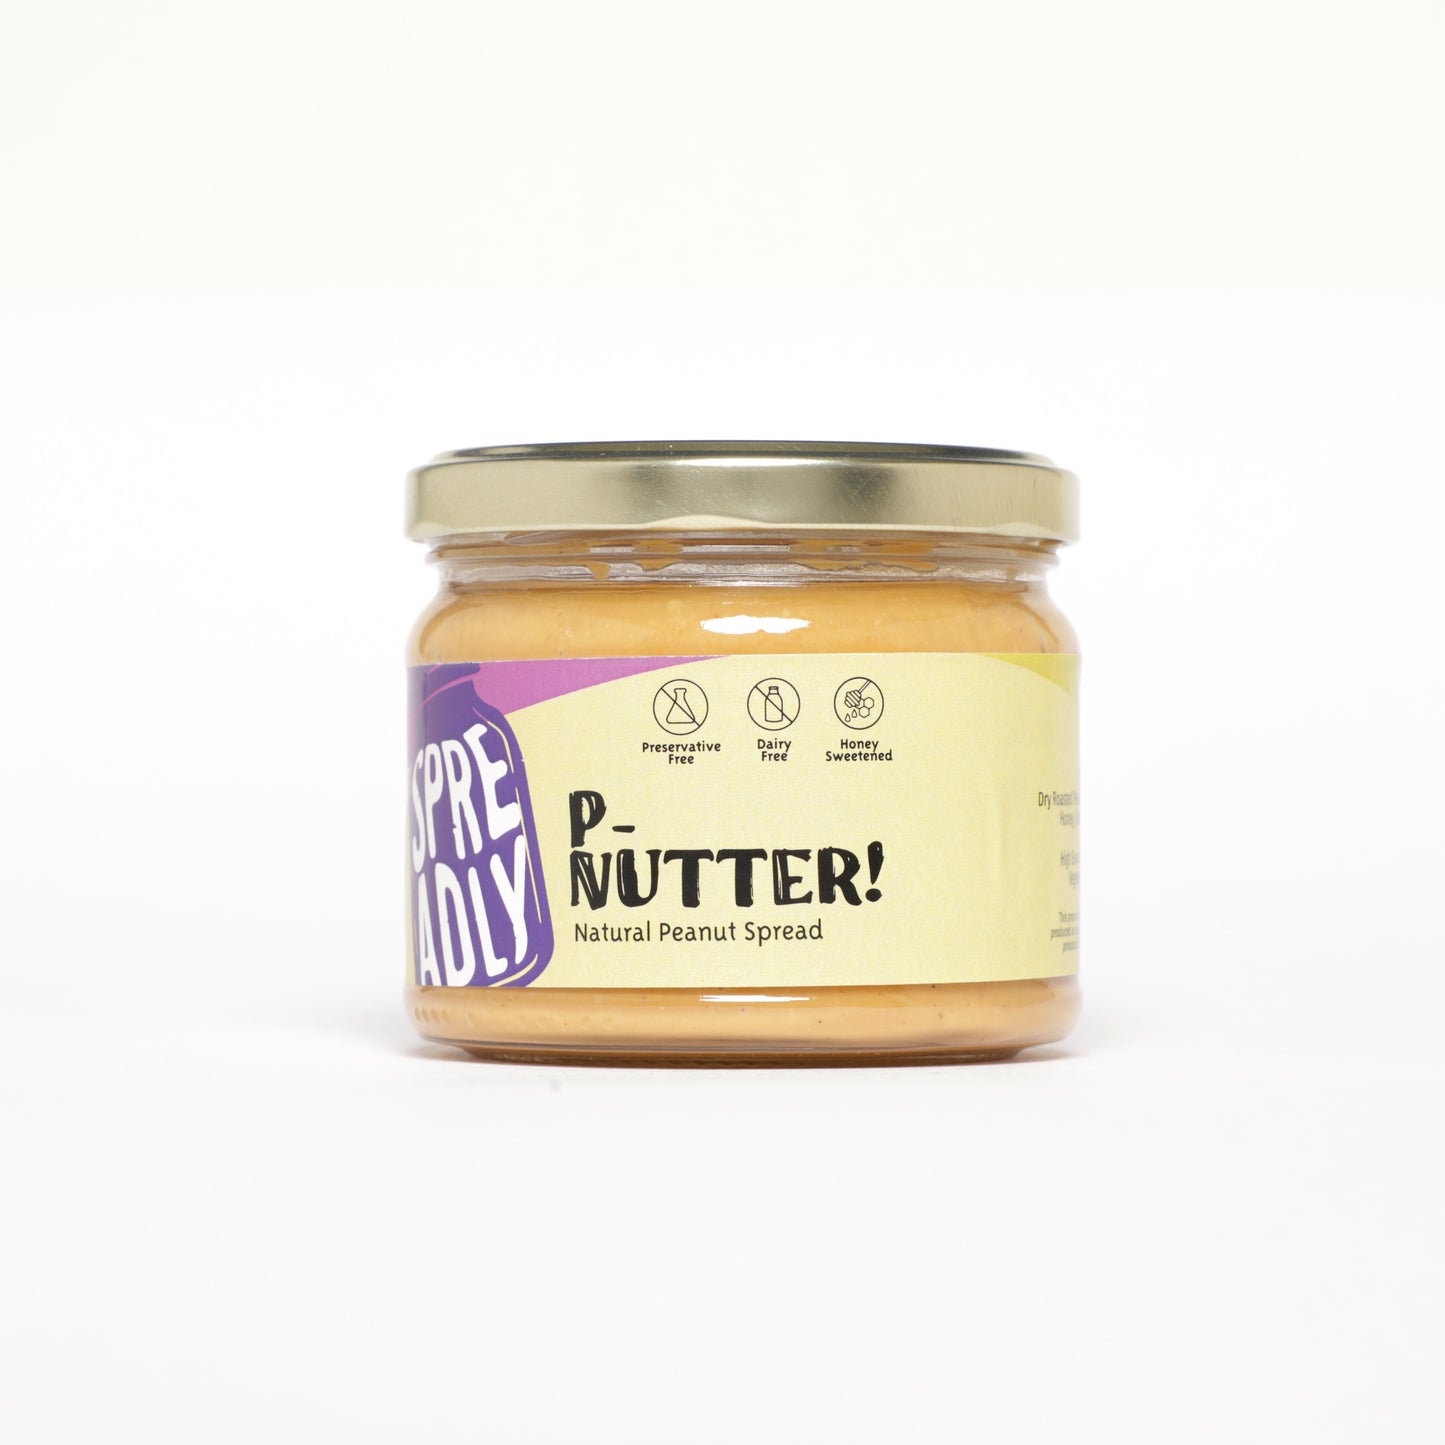 Natural Peanut Spread Made from Natural Ingredients and Sweetened with Honey . No preservatives - No sugar and no palm oil 